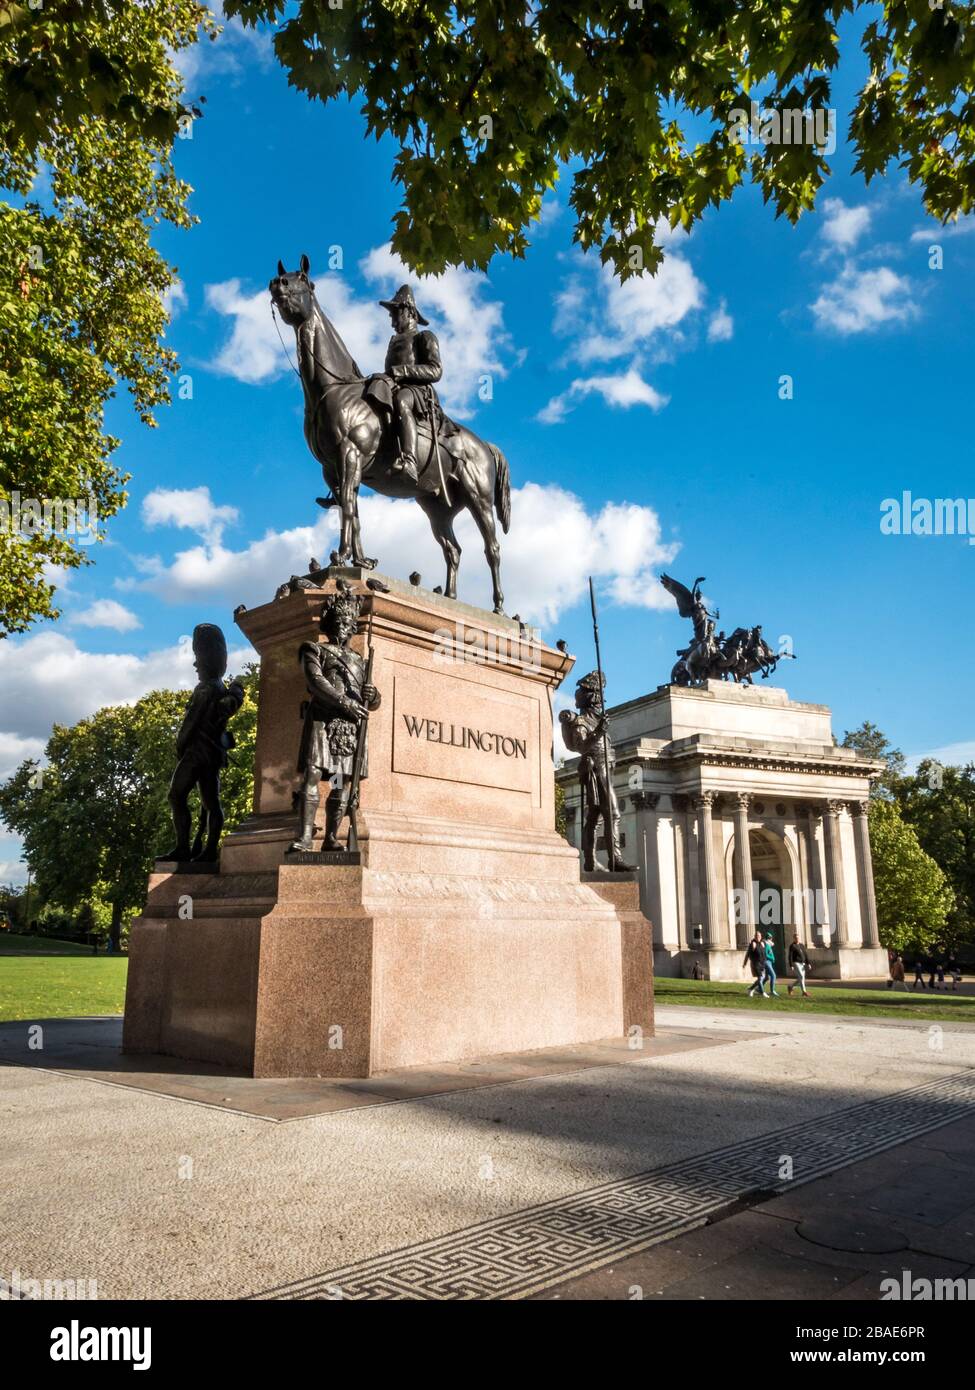 Wellington Statue and Arch, Hyde Park, London. Statue to the 19th Century English military leader Arthur Wellesley, the 1st Duke of Wellington. Stock Photo